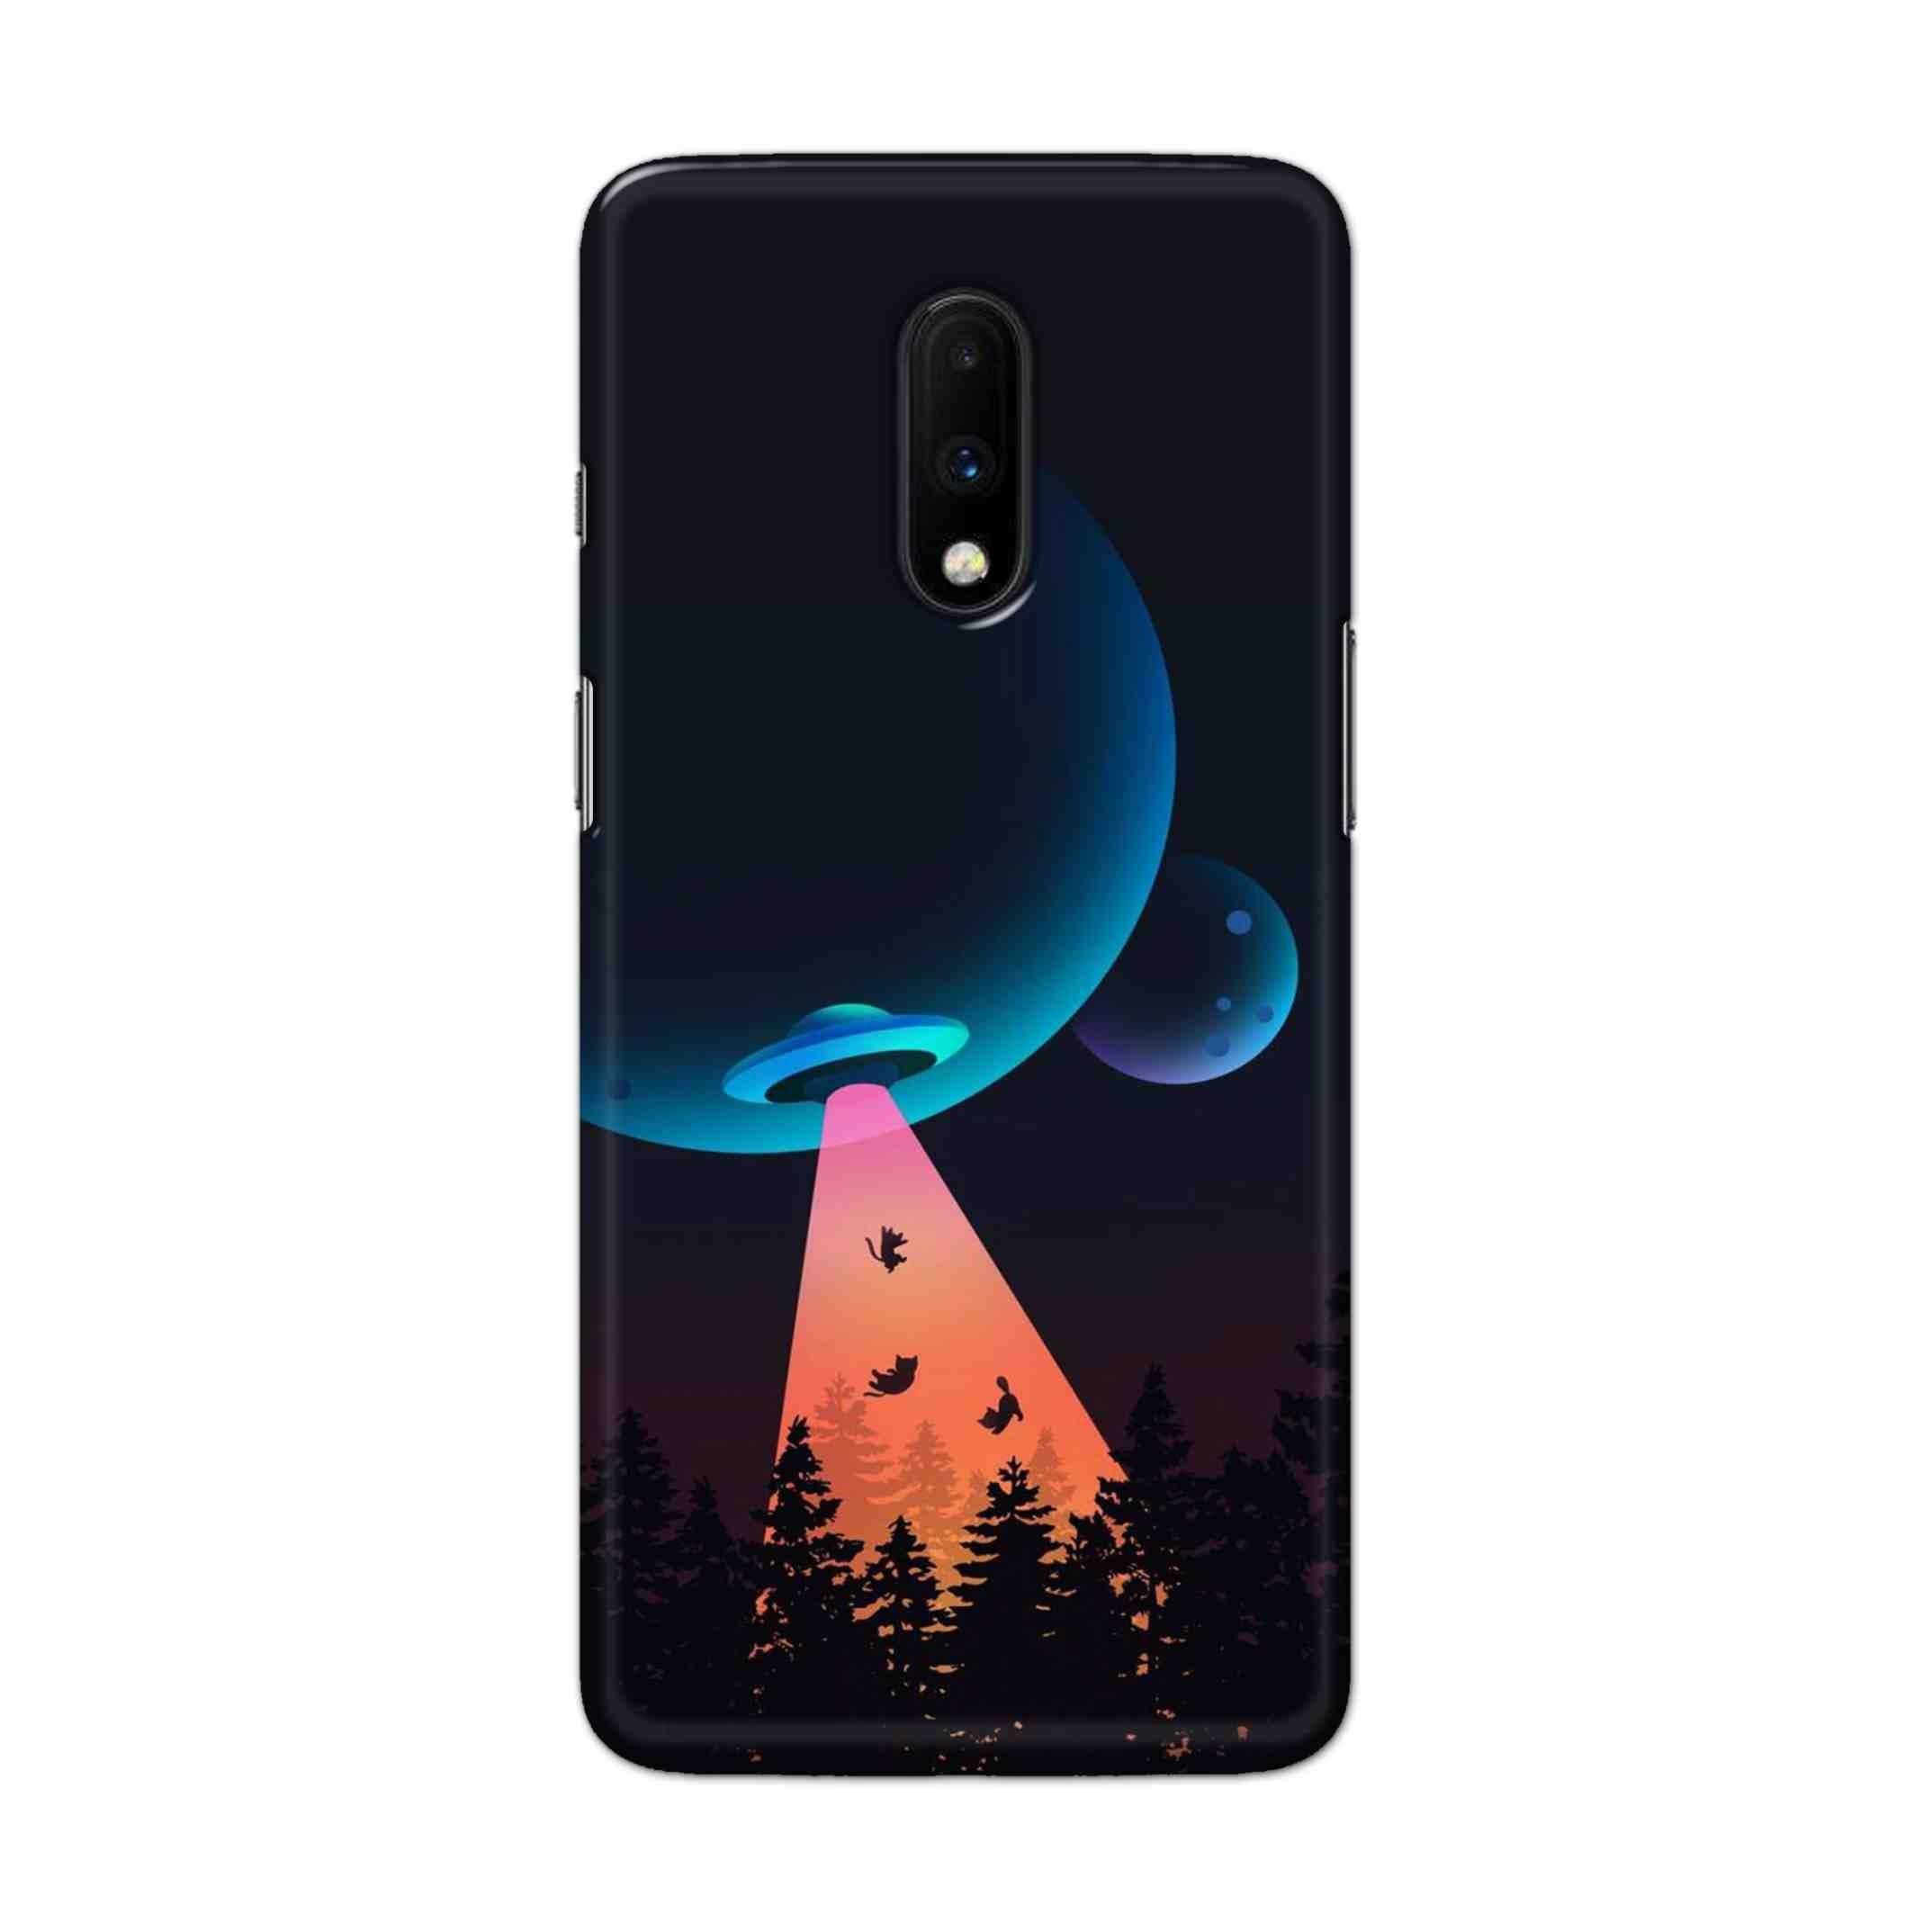 Buy Spaceship Hard Back Mobile Phone Case Cover For OnePlus 7 Online